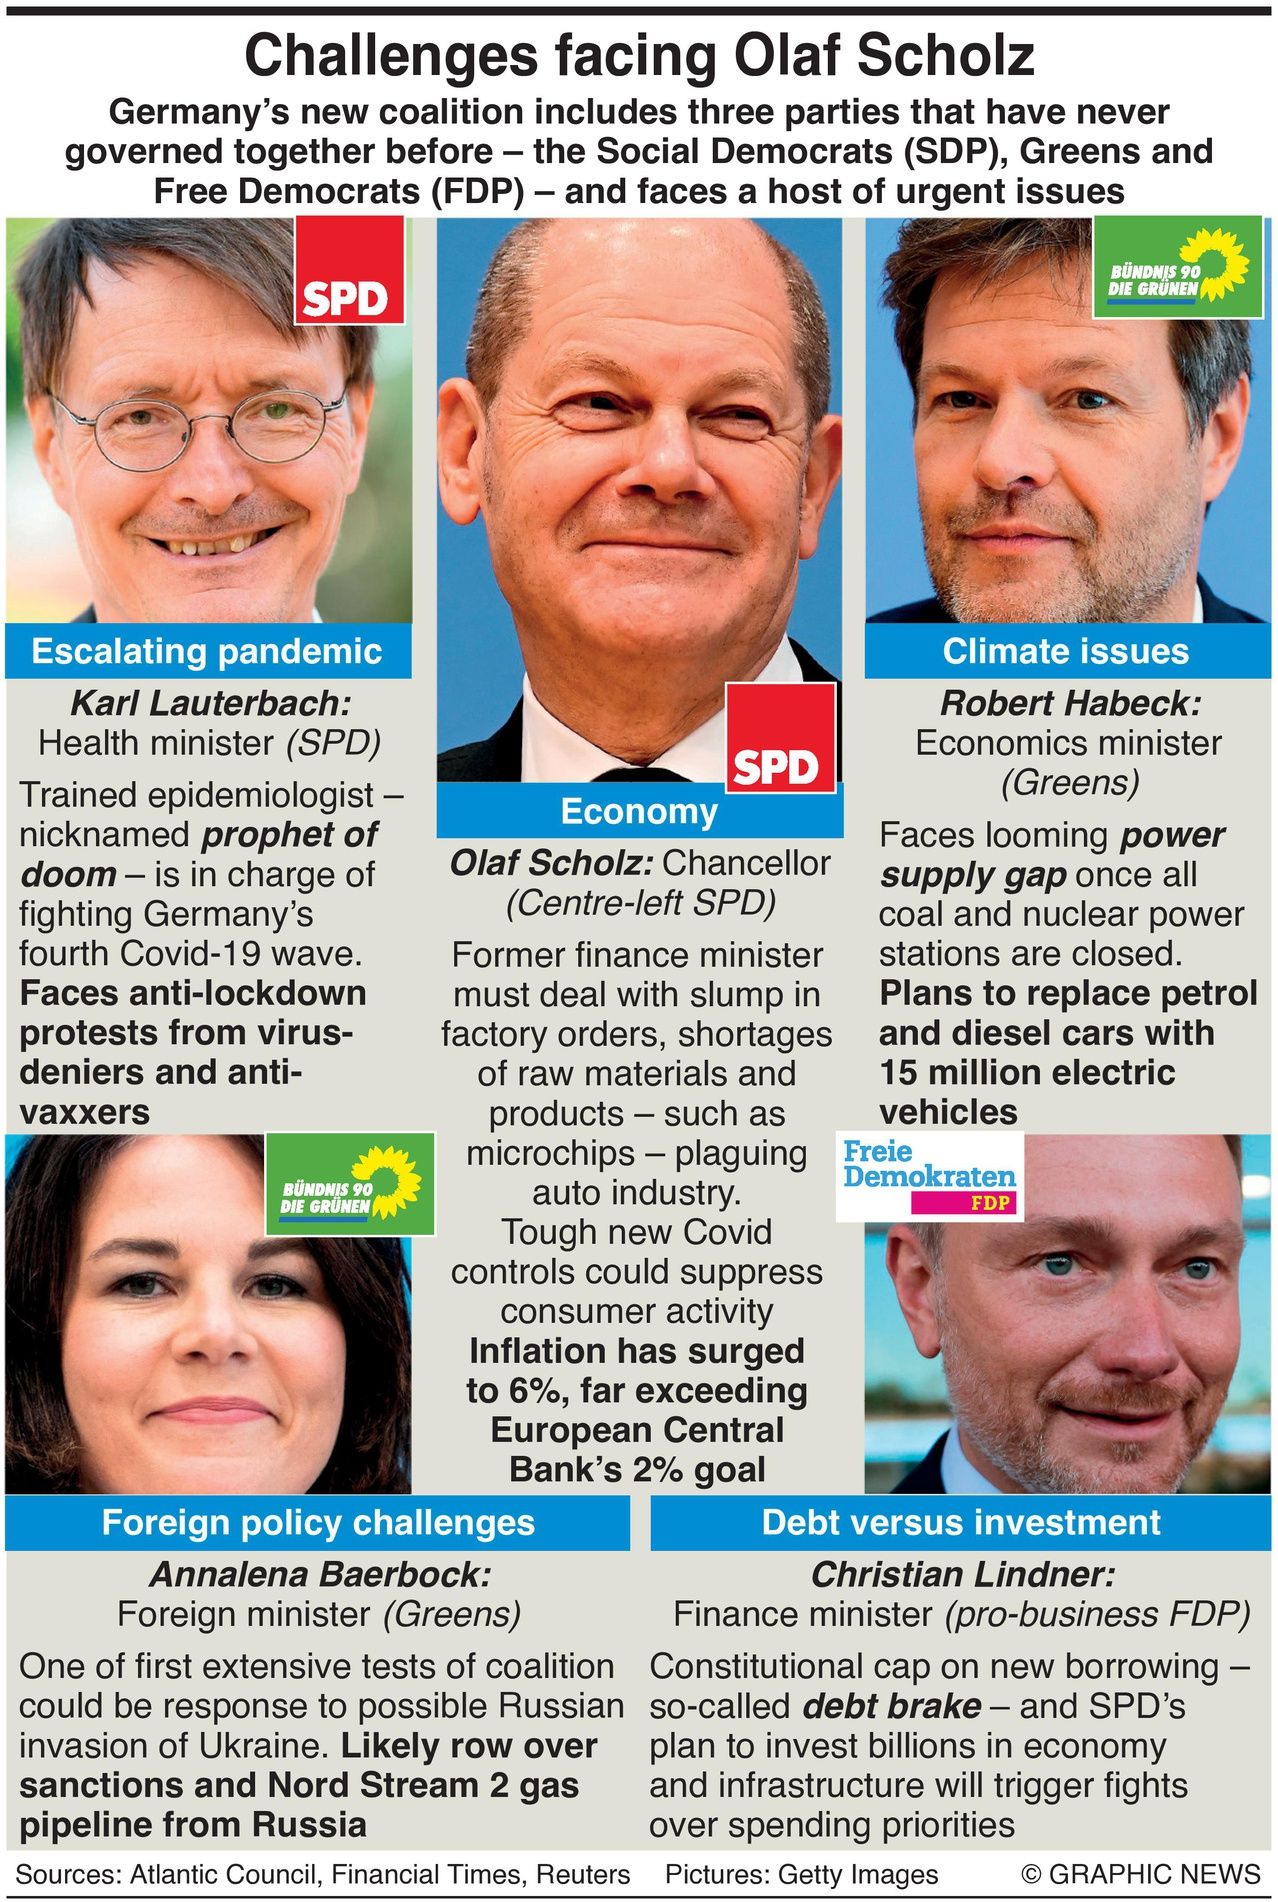 Olaf Scholz's party